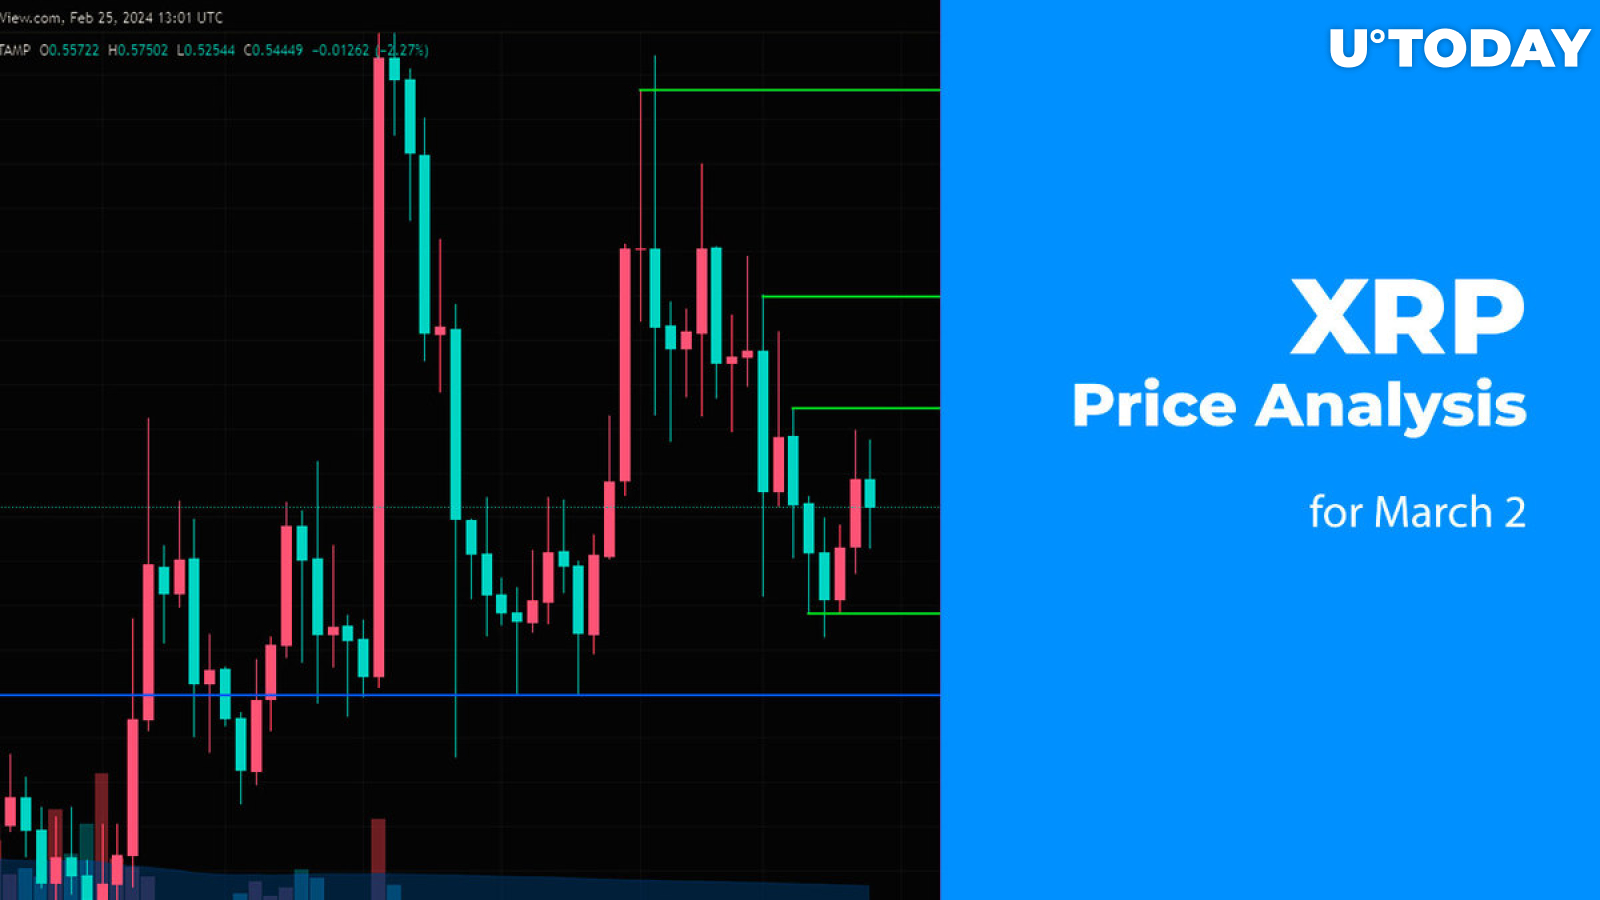 XRP Price Prediction for March 2